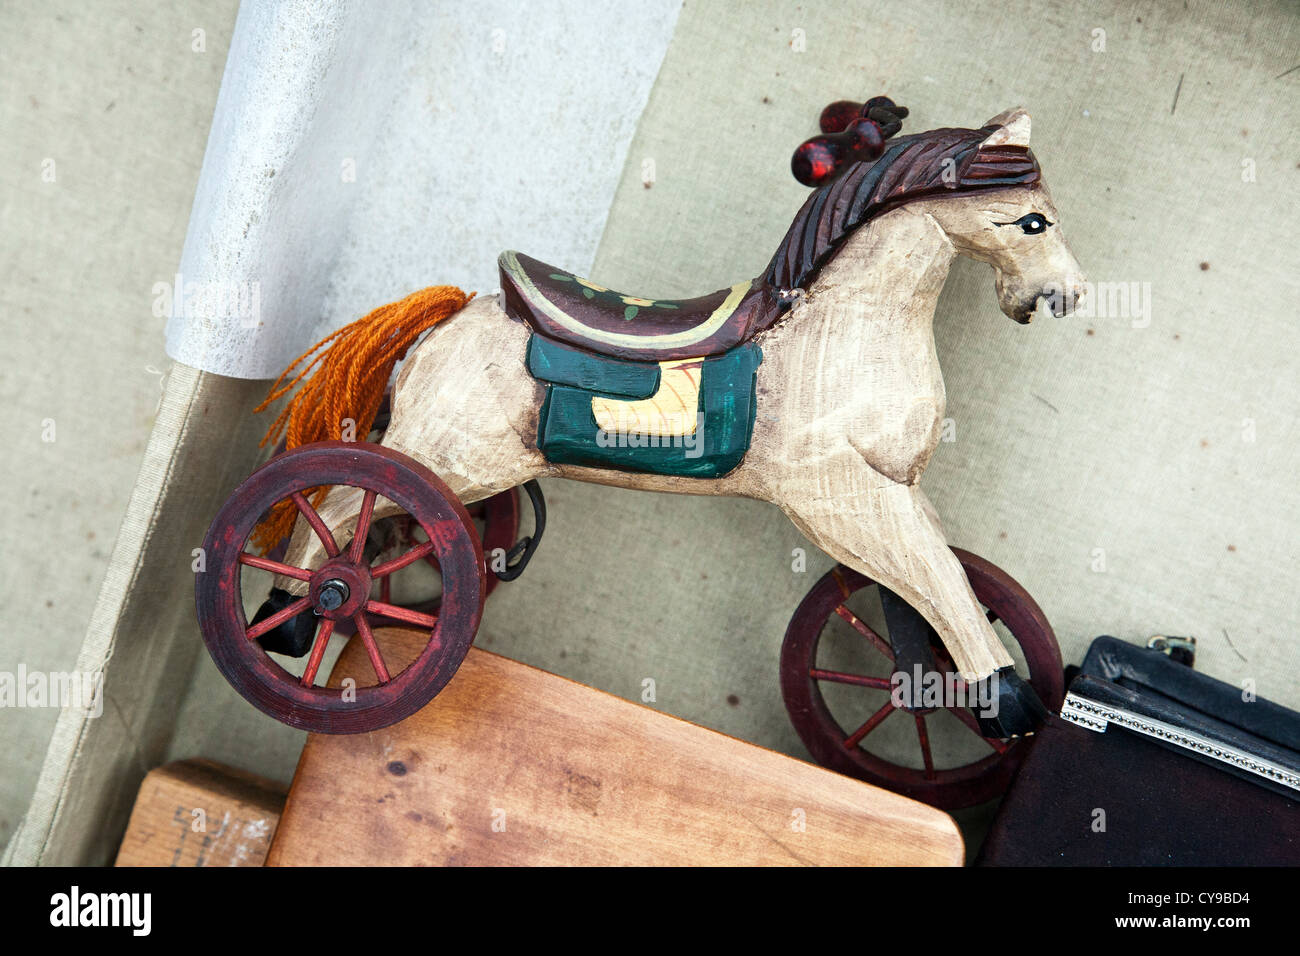 beautiful old polychrome wood miniature white hobby horse toy with orange yarn tail for sale at Hells Kitchen weekend fleamarket Stock Photo